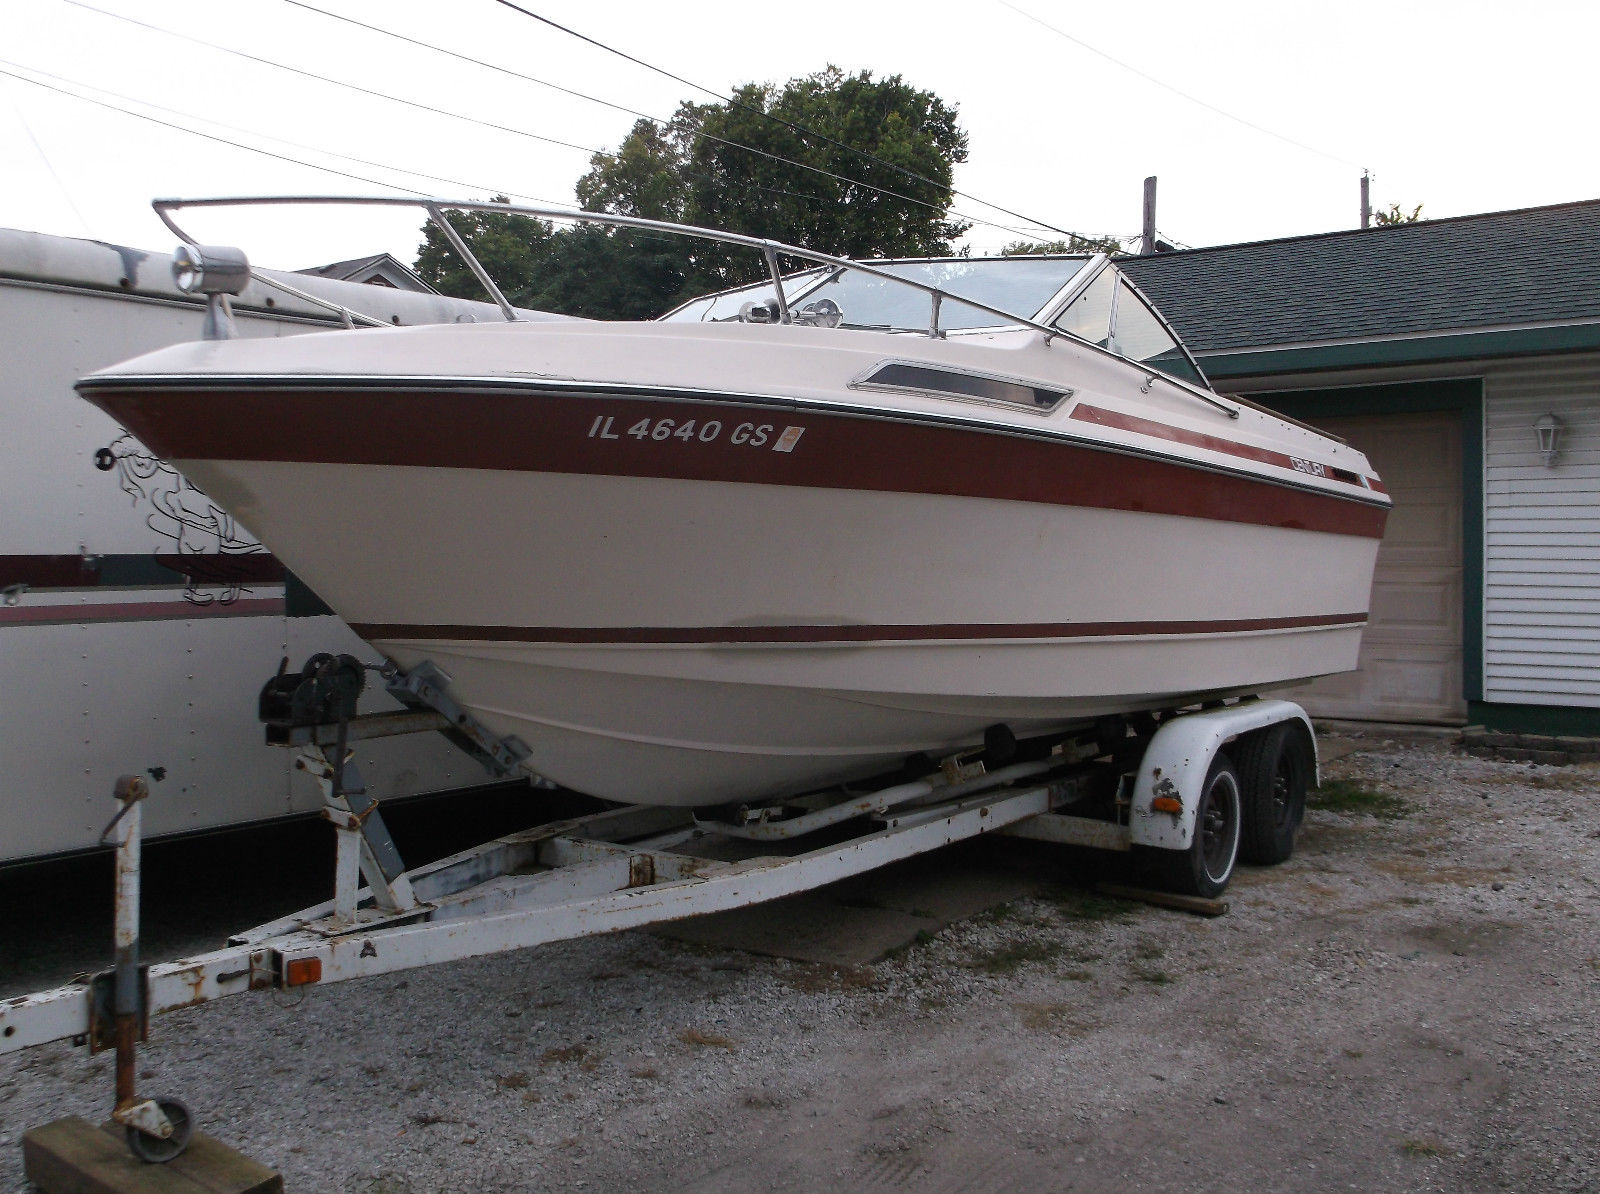 Century Cuddy Cabin 1978 for sale for $350 - Boats-from ...